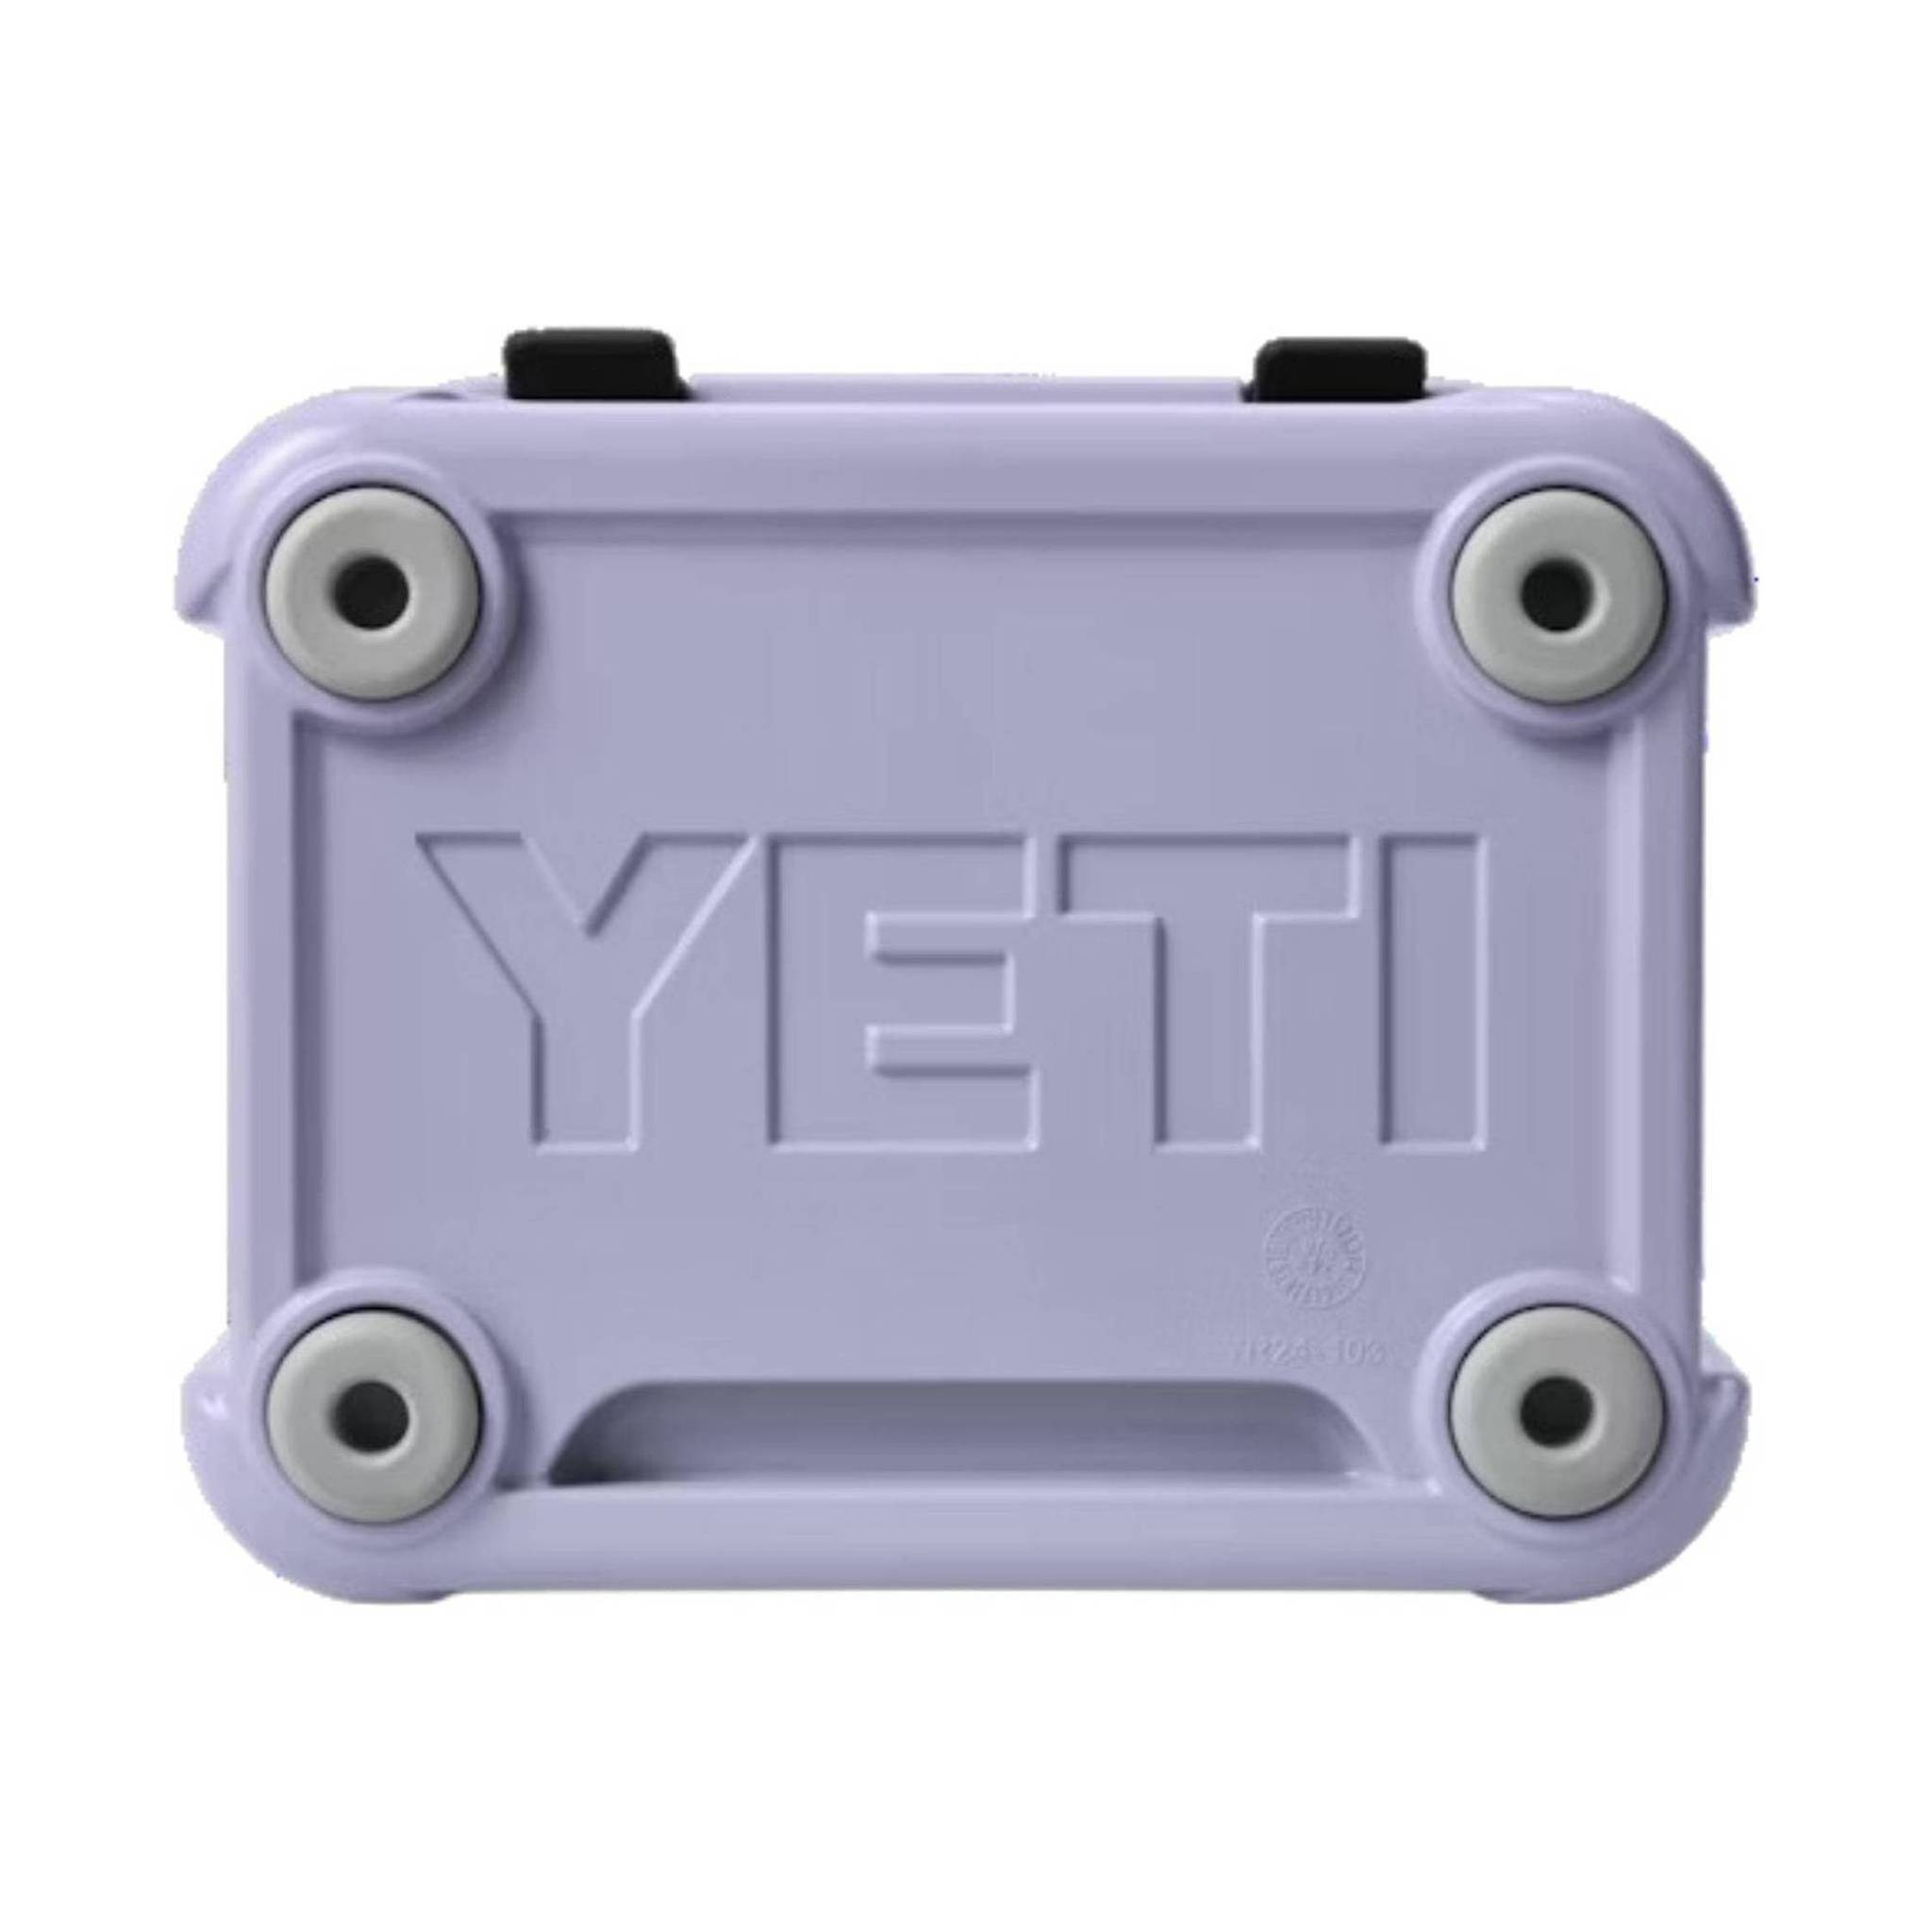 YETI Roadie 24 Hard Cooler - Cosmic Lilac (Limited Edition